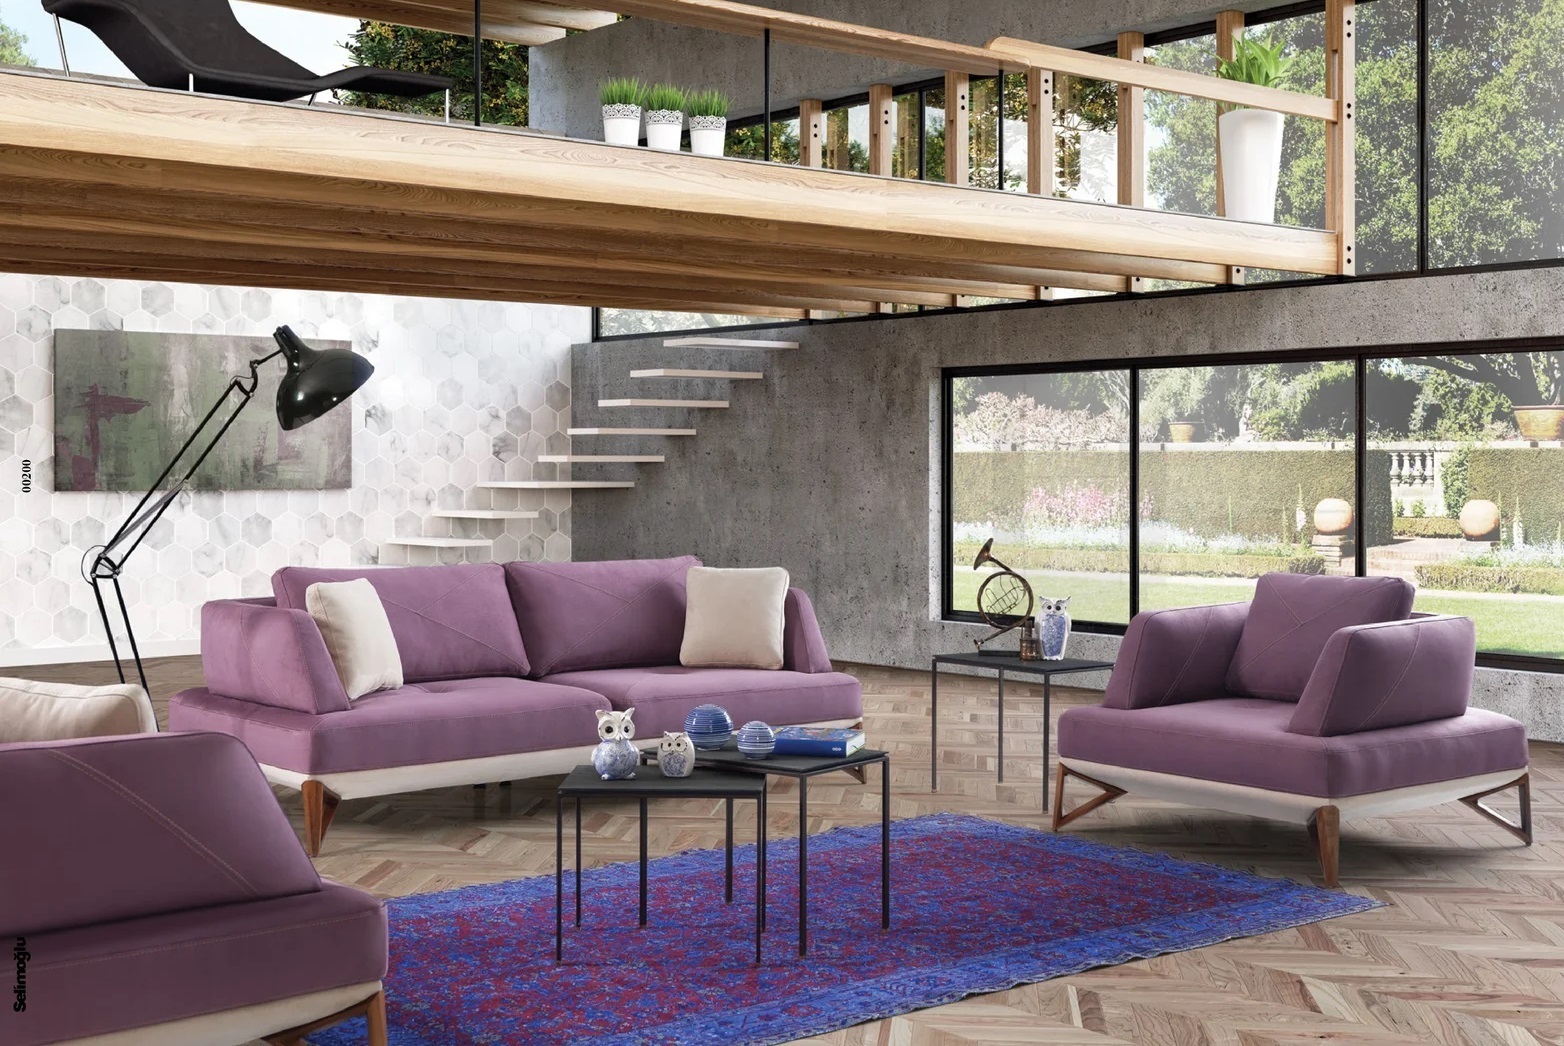 Purple couch and chairs with accents